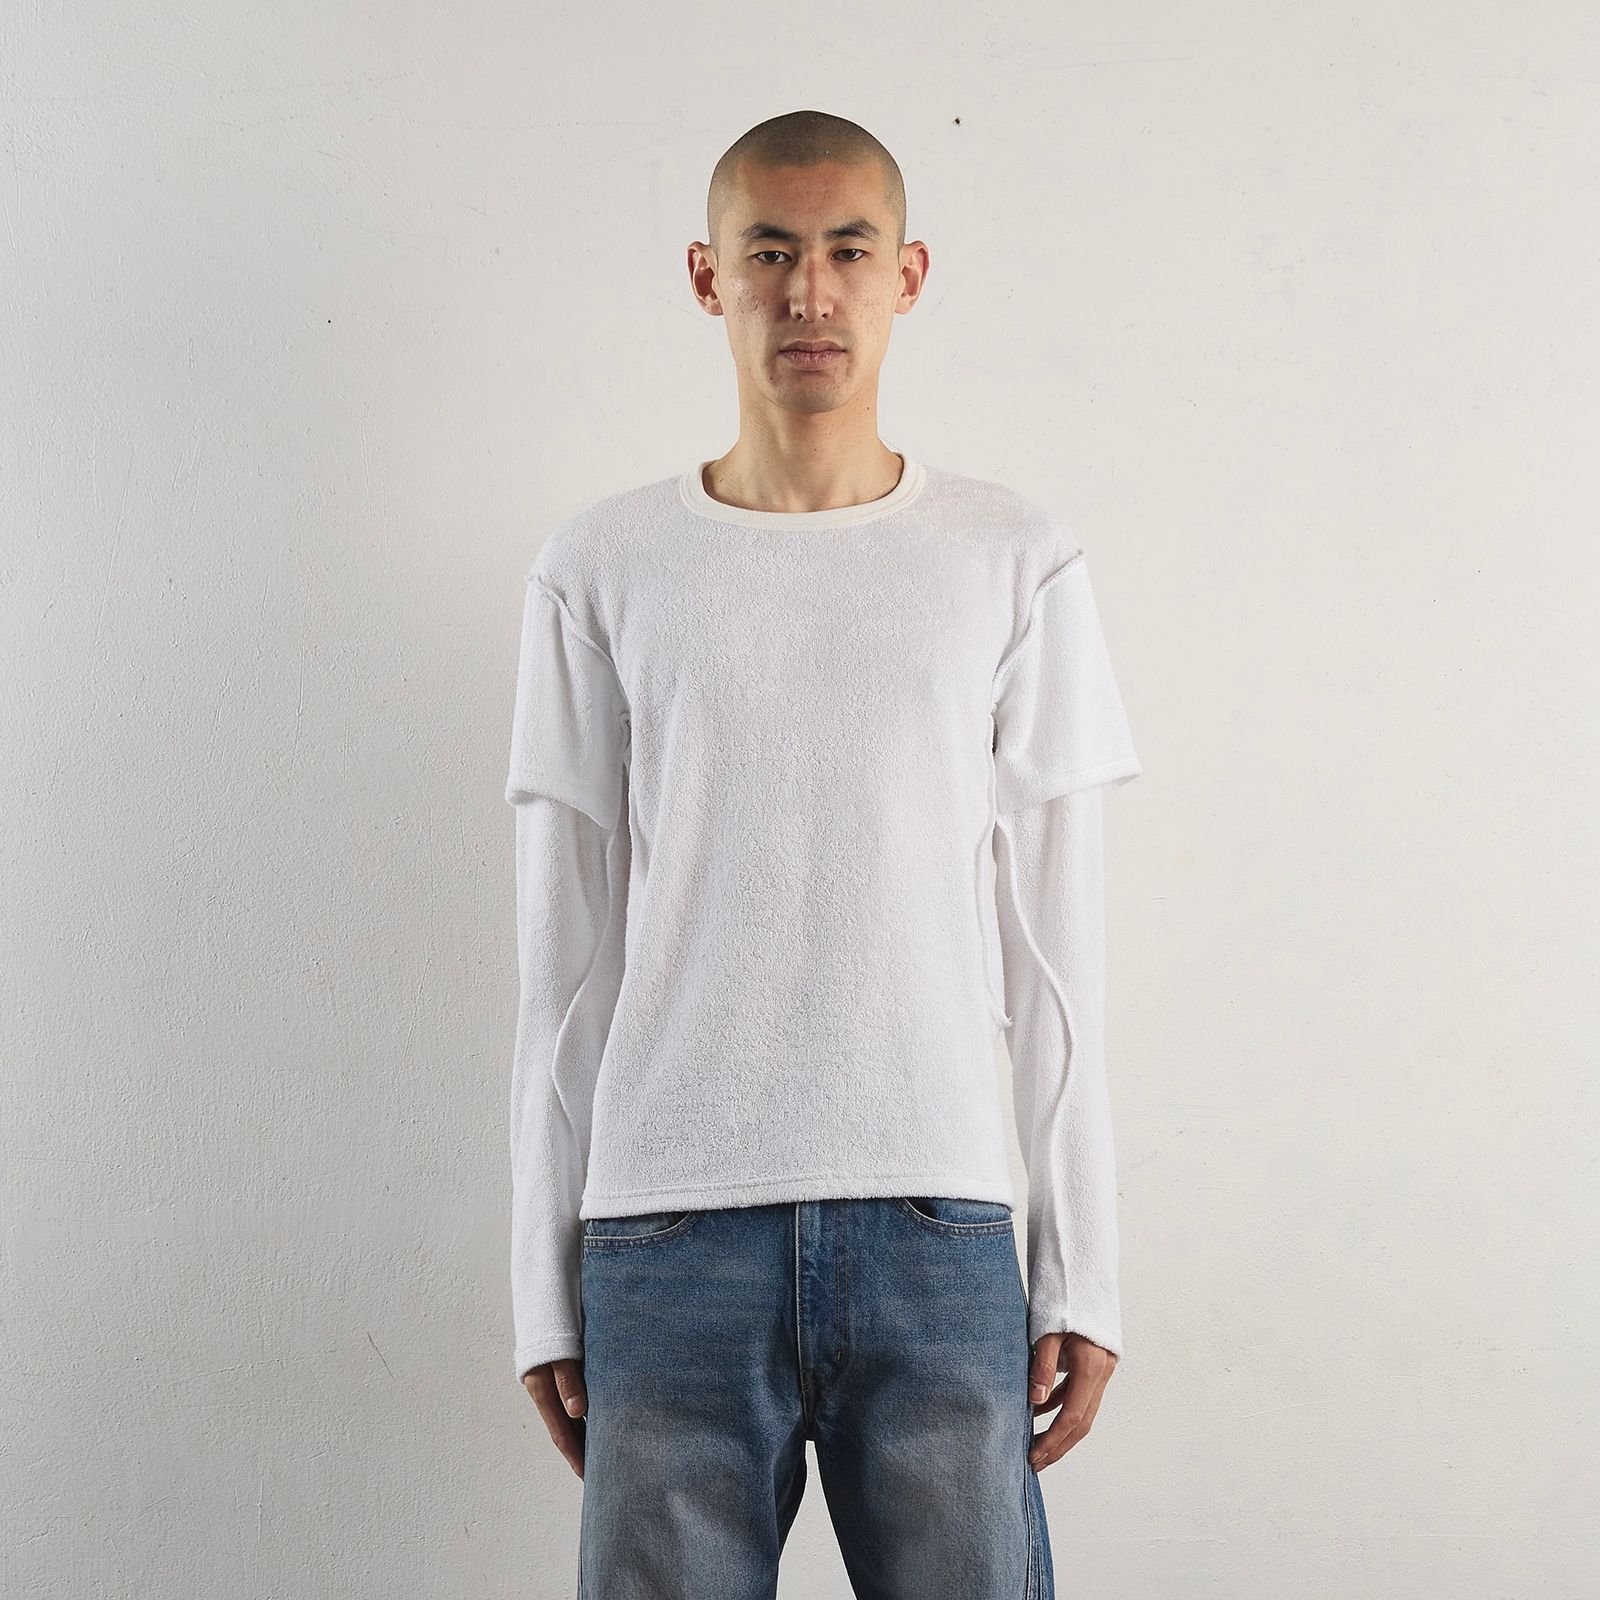 NVRFRGT - 【残りわずか】Terry Double Layer Long Sleeve T-shirt ...